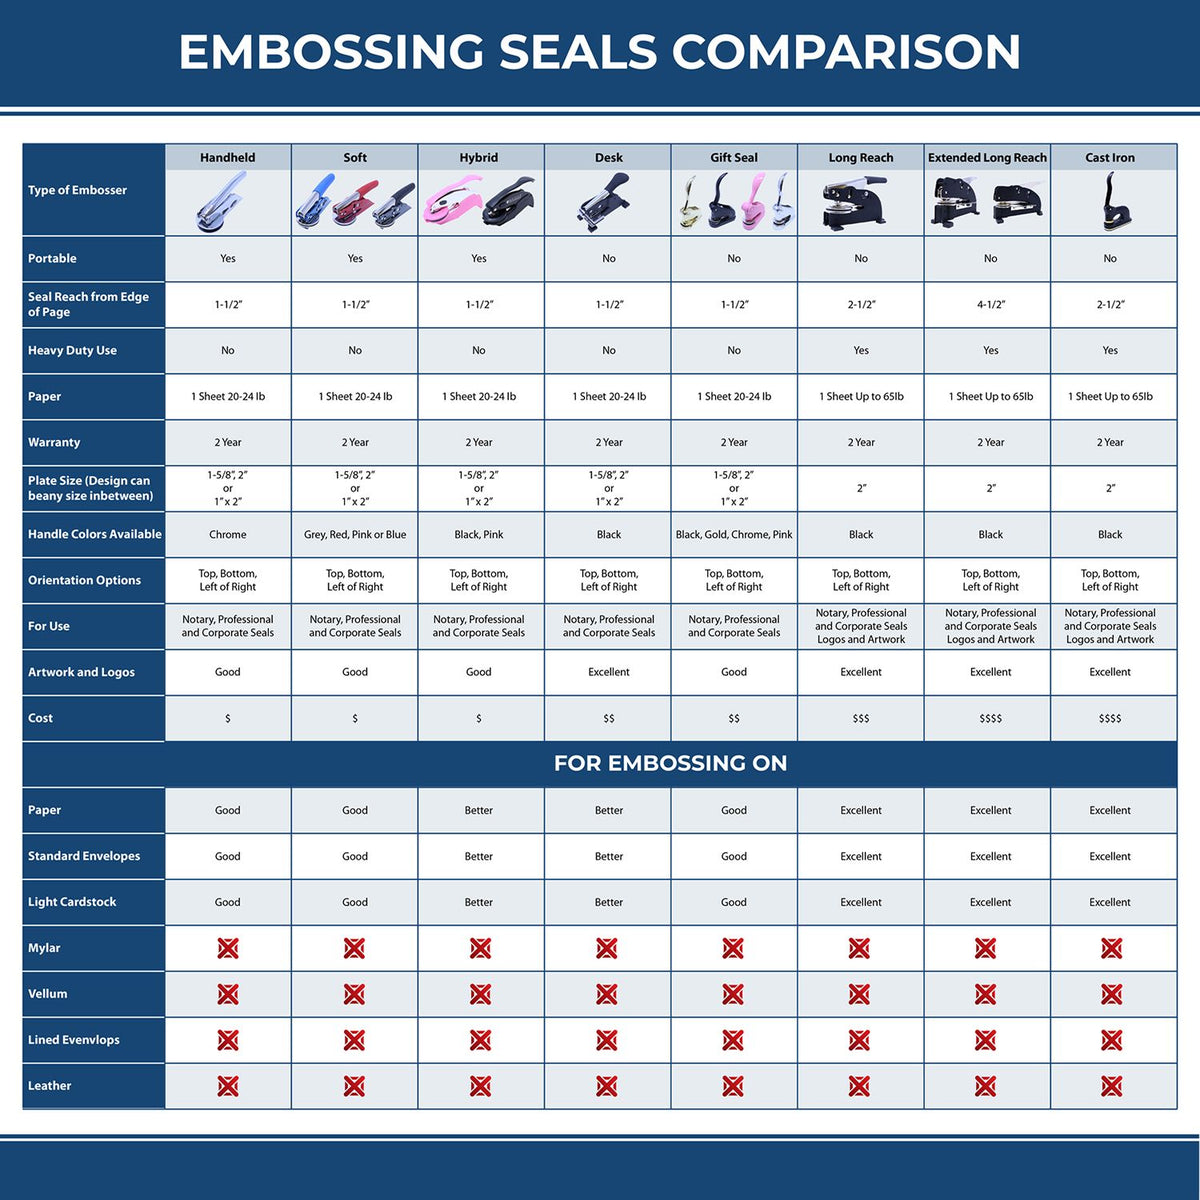 A comparison chart for the different types of mount models available for the State of Oregon Extended Long Reach Geologist Seal